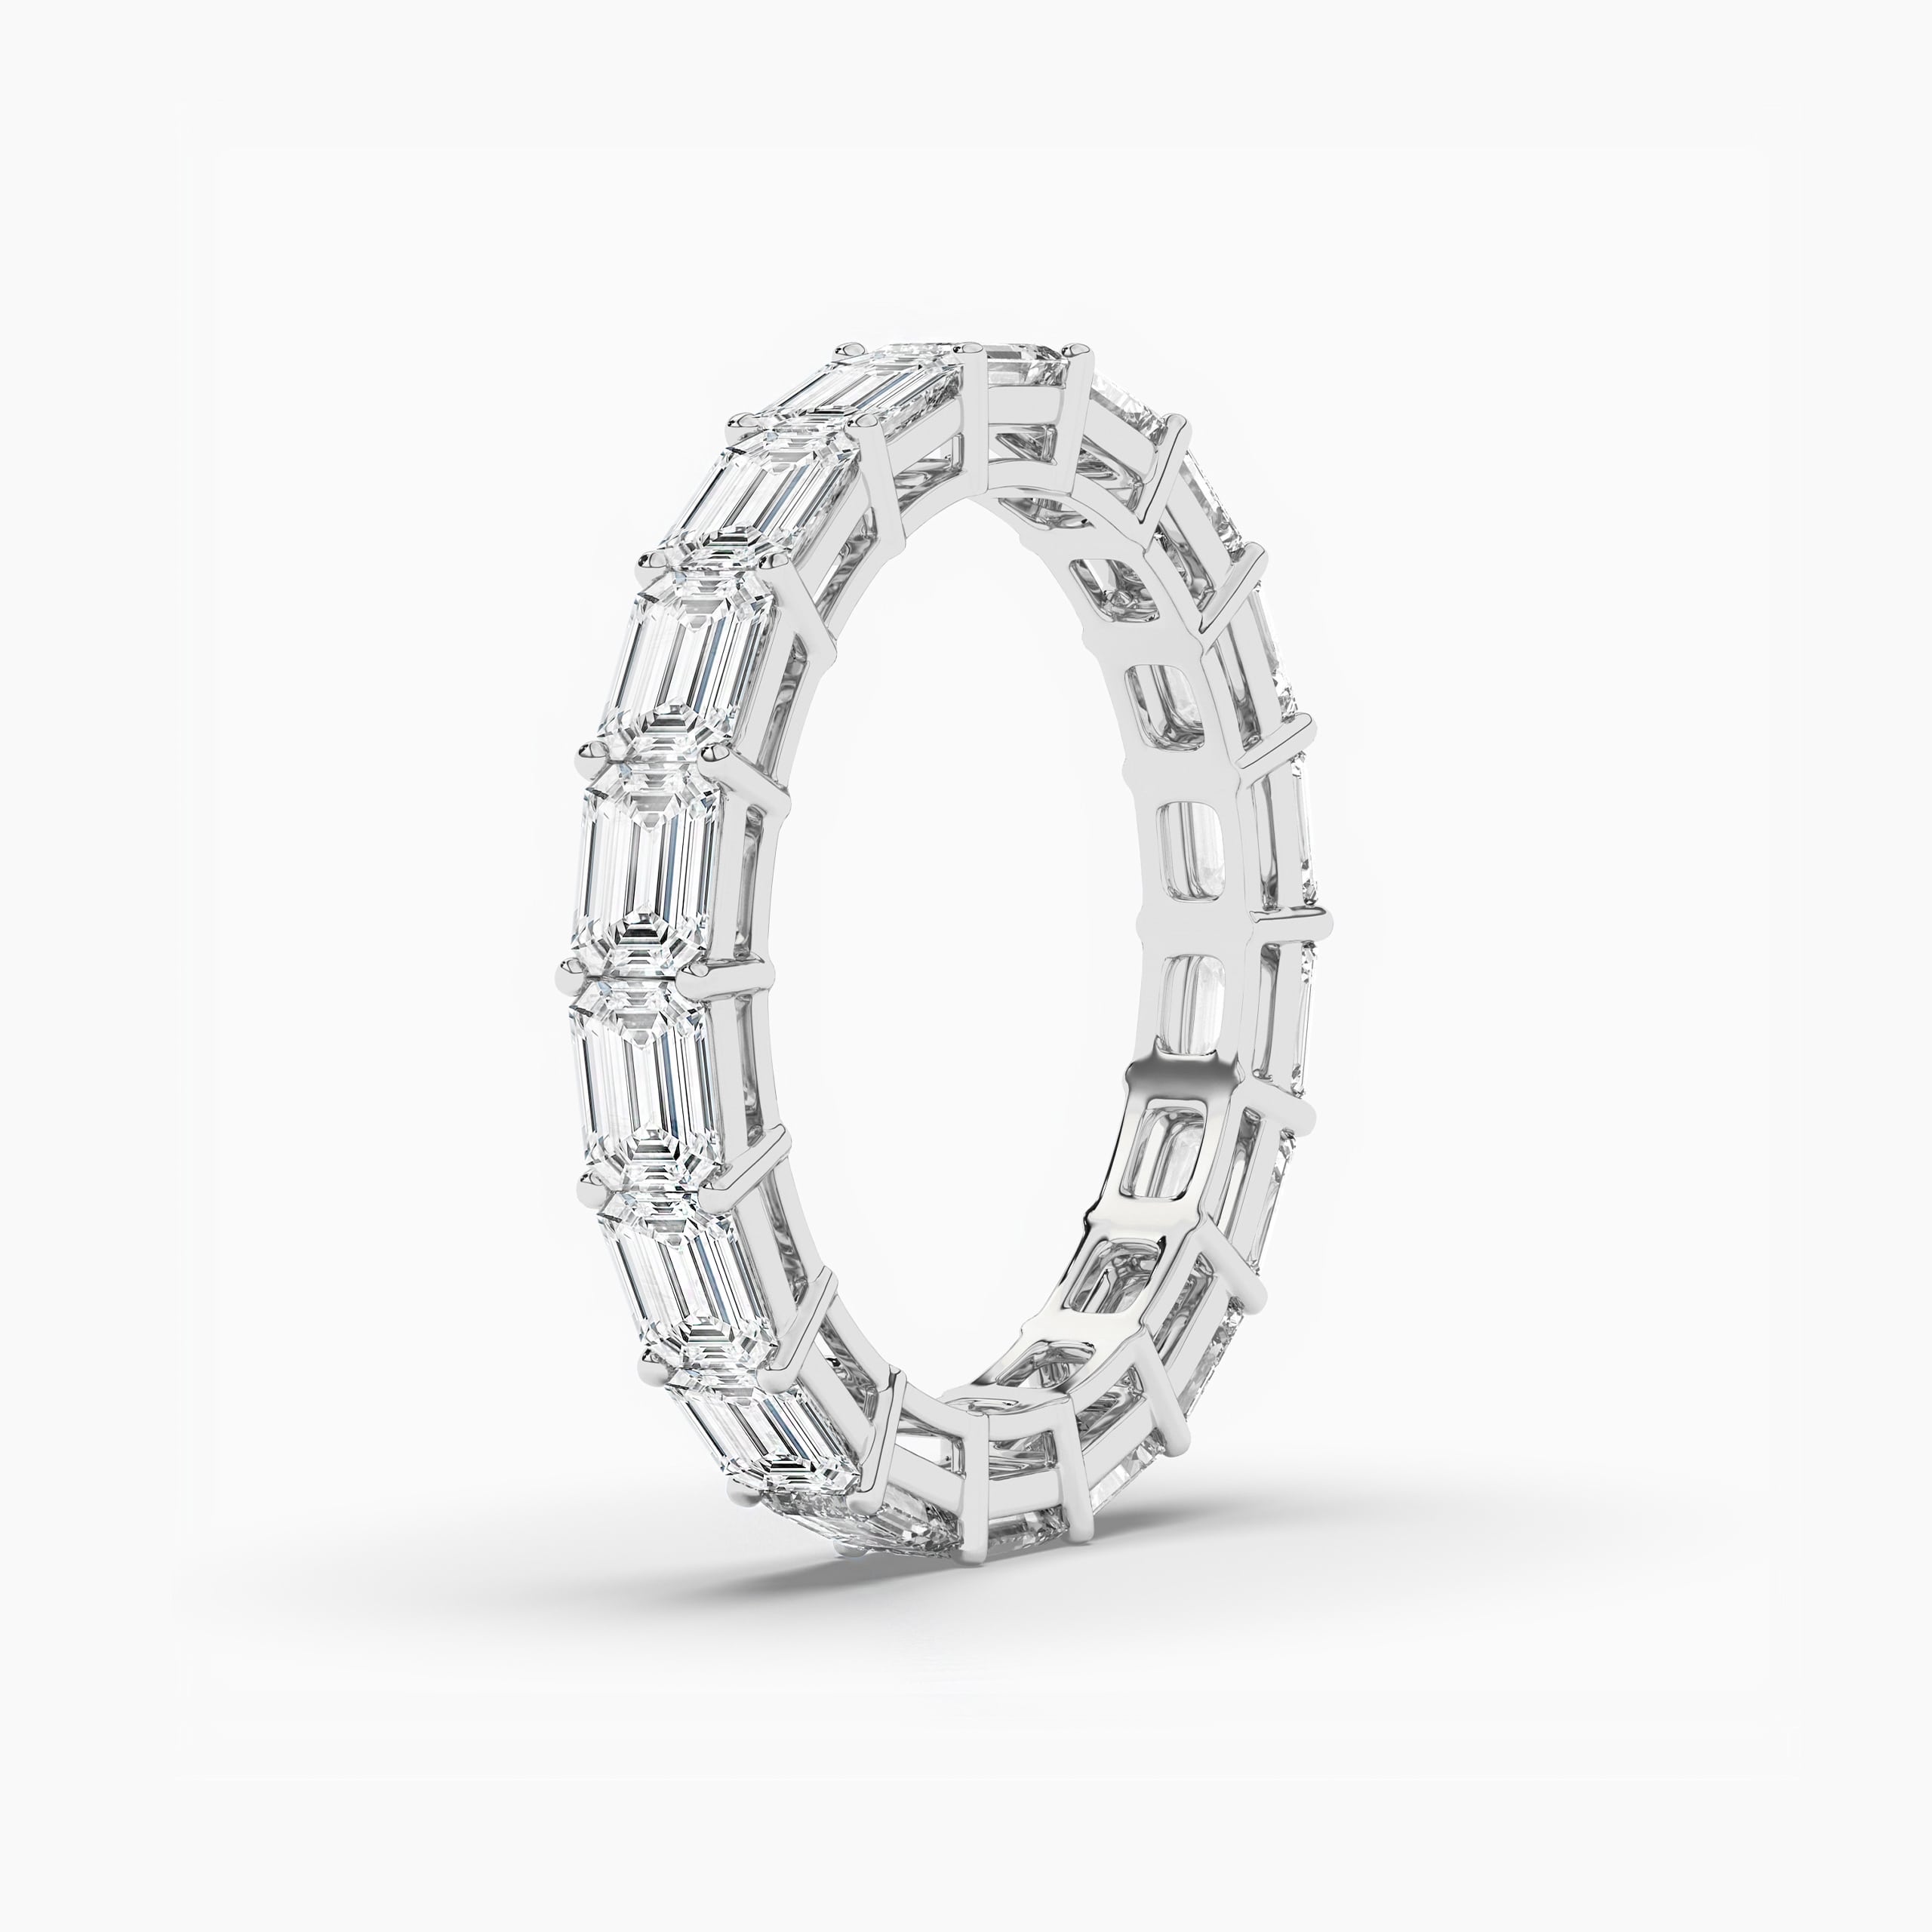 East to West Emerald Cut Eternity In White Gold